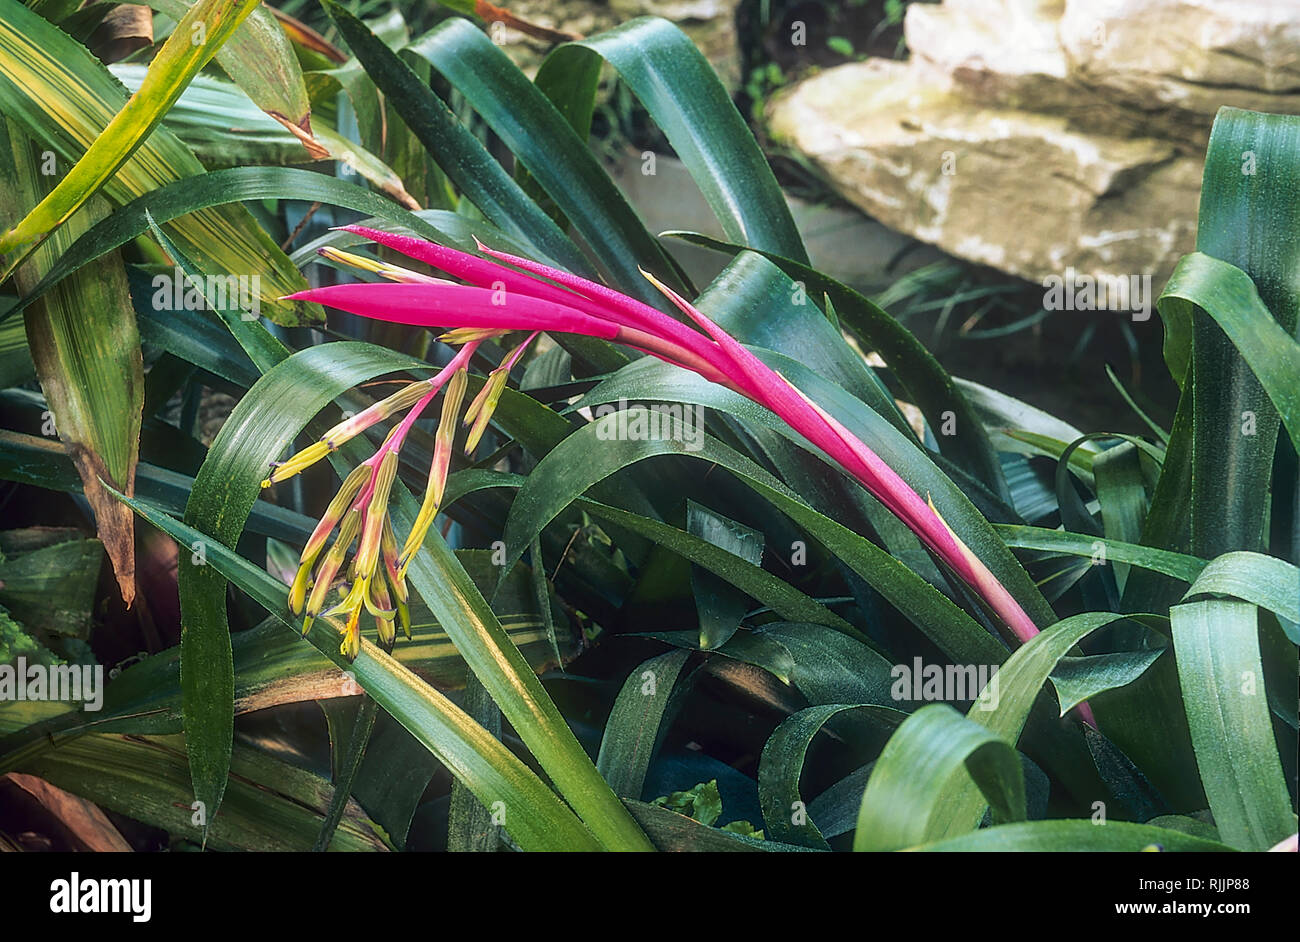 Billbergia nutans with long slender red bract flower stems showing Yelloish-green flowers  Is also called Friendship plant or Queens tears Stock Photo